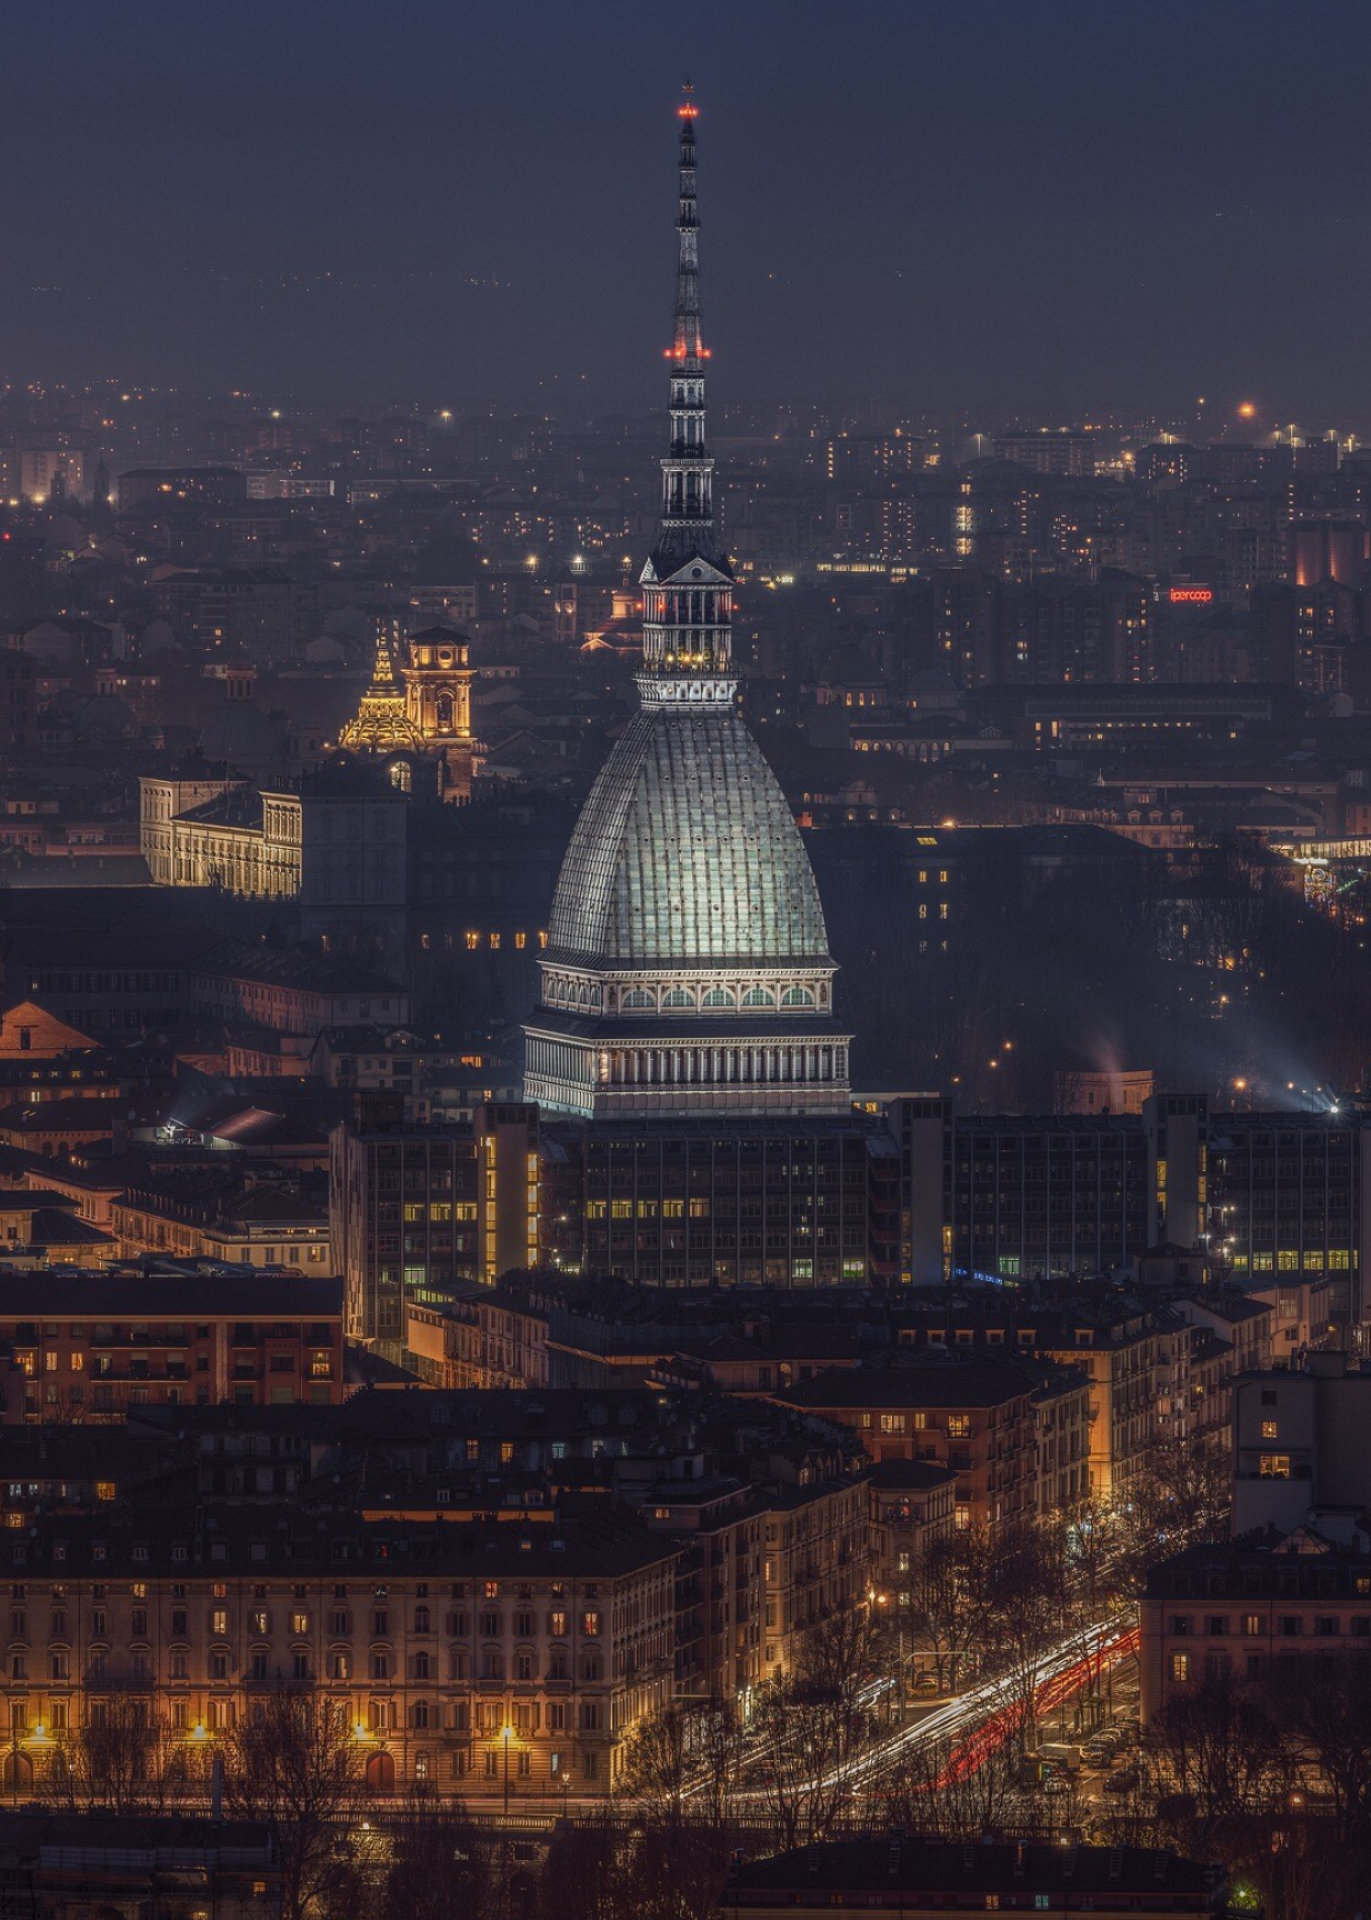 Turin: Part of the "industrial triangle" along with Milan and Genoa. 1380x1920 HD Wallpaper.